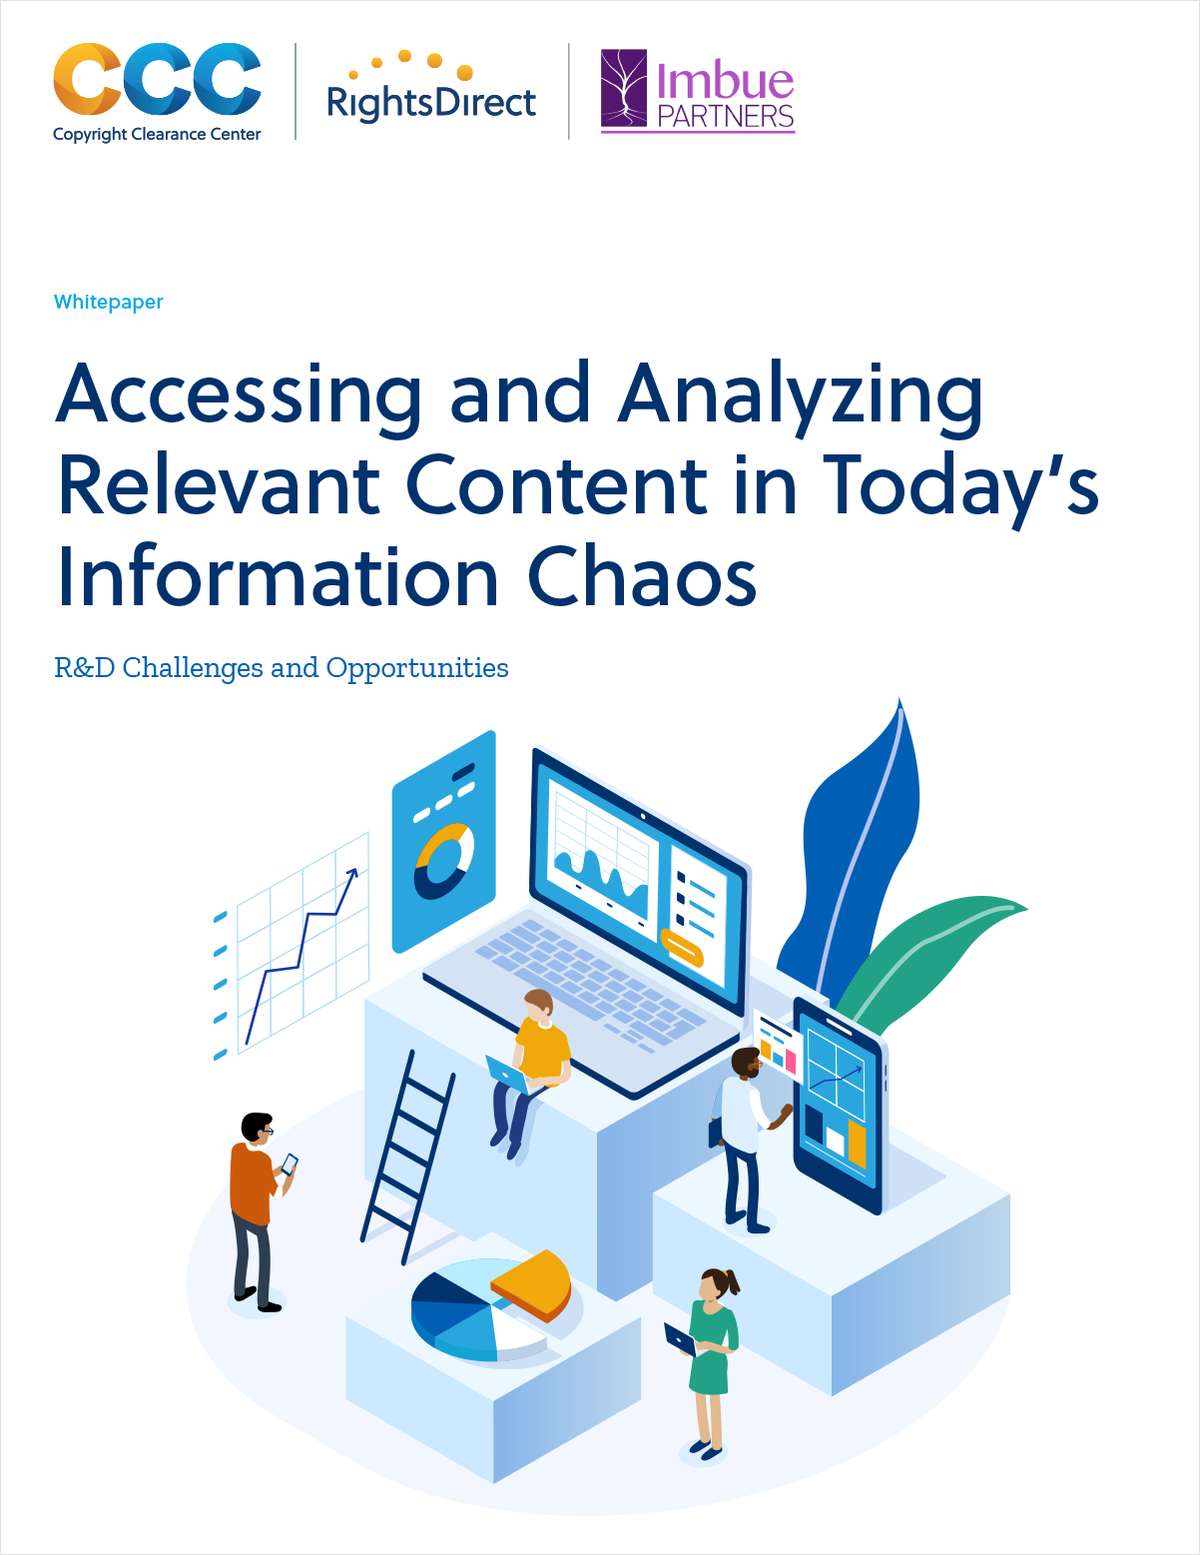 Accessing and Analyzing Relevant Content in Today's Information Chaos